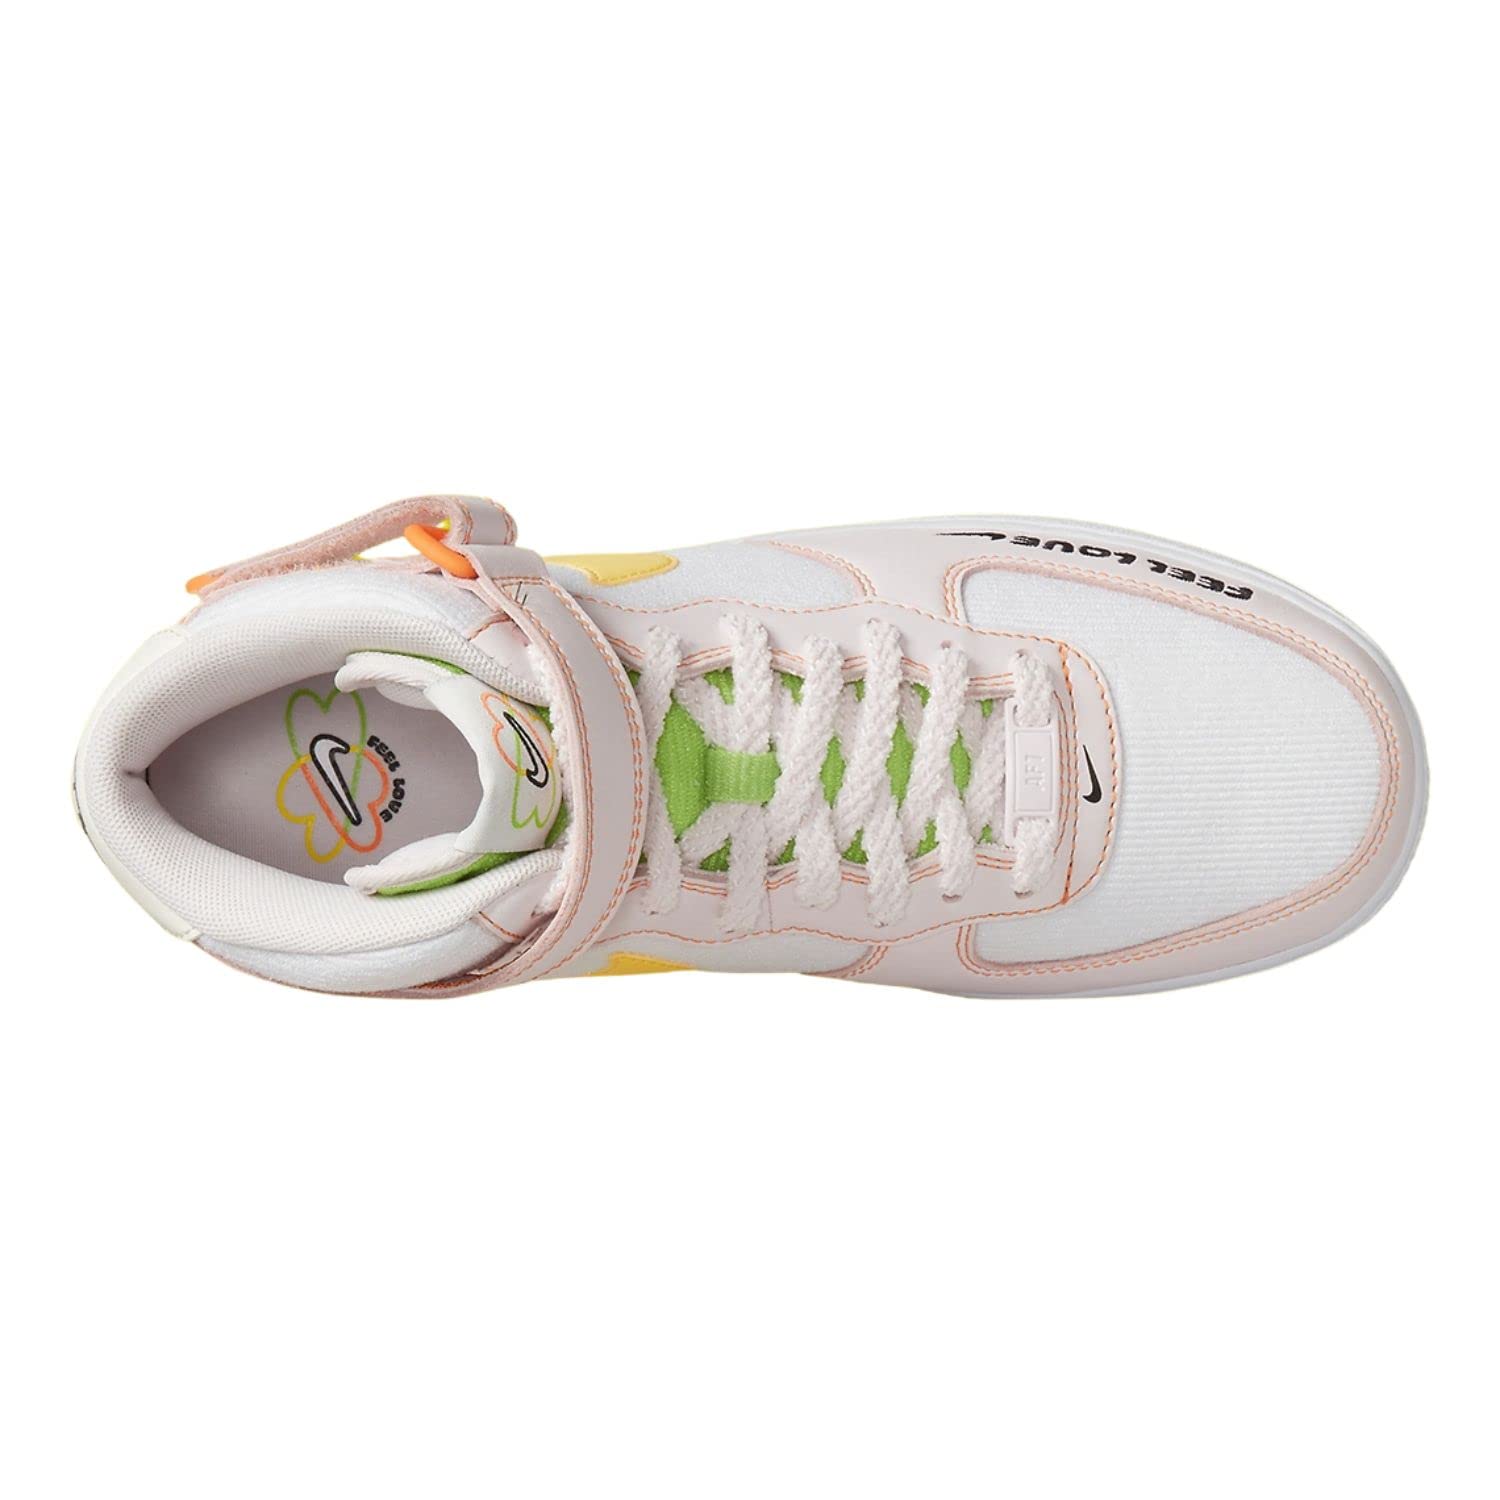 Nike Women's Air Force 1 '07 Mid Shoes, White/Opti Yellow-pearl Pink, 7.5